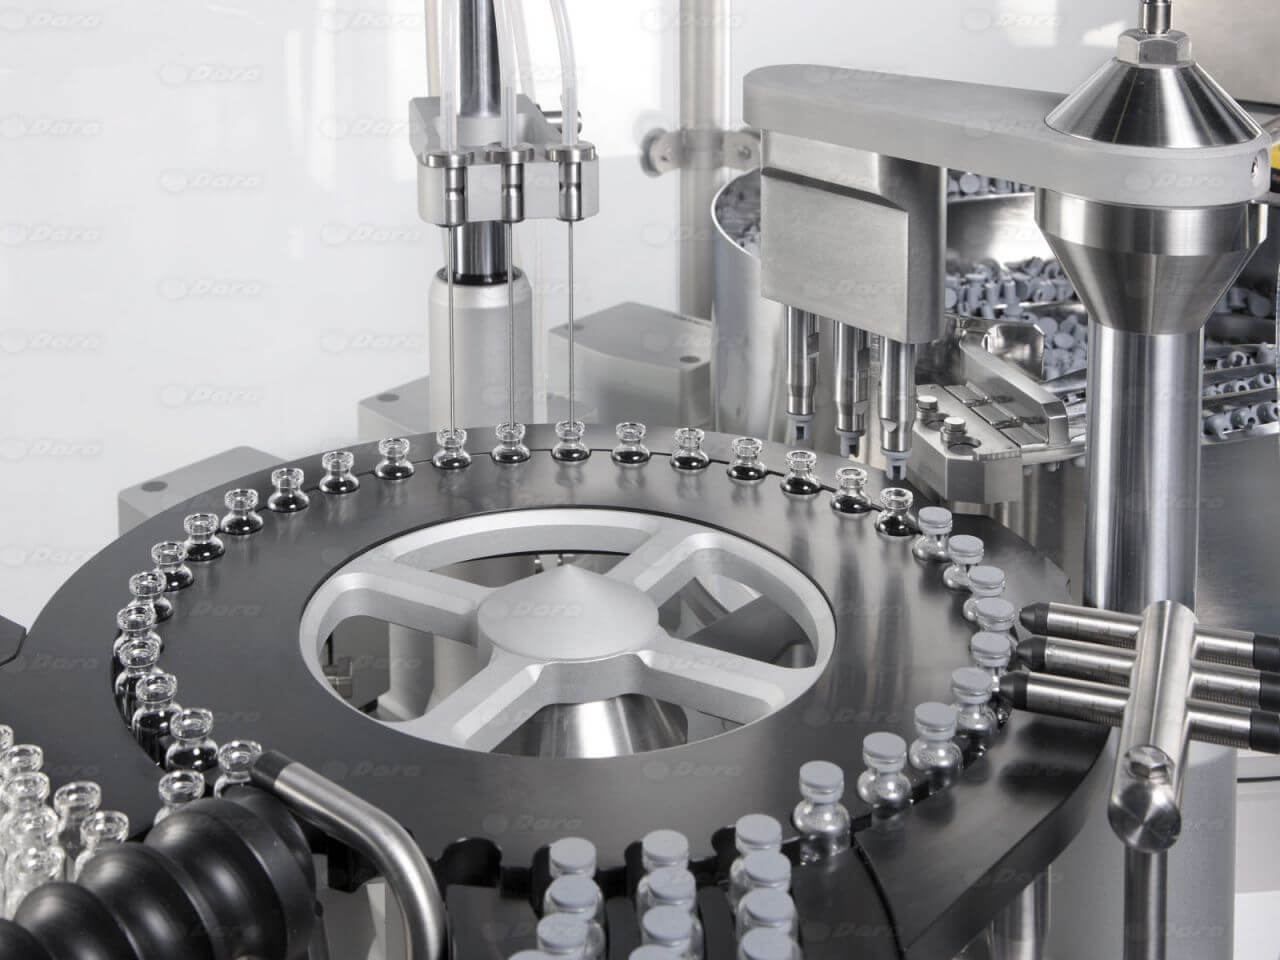 Sealing Product Solutions for the Pharmaceutical